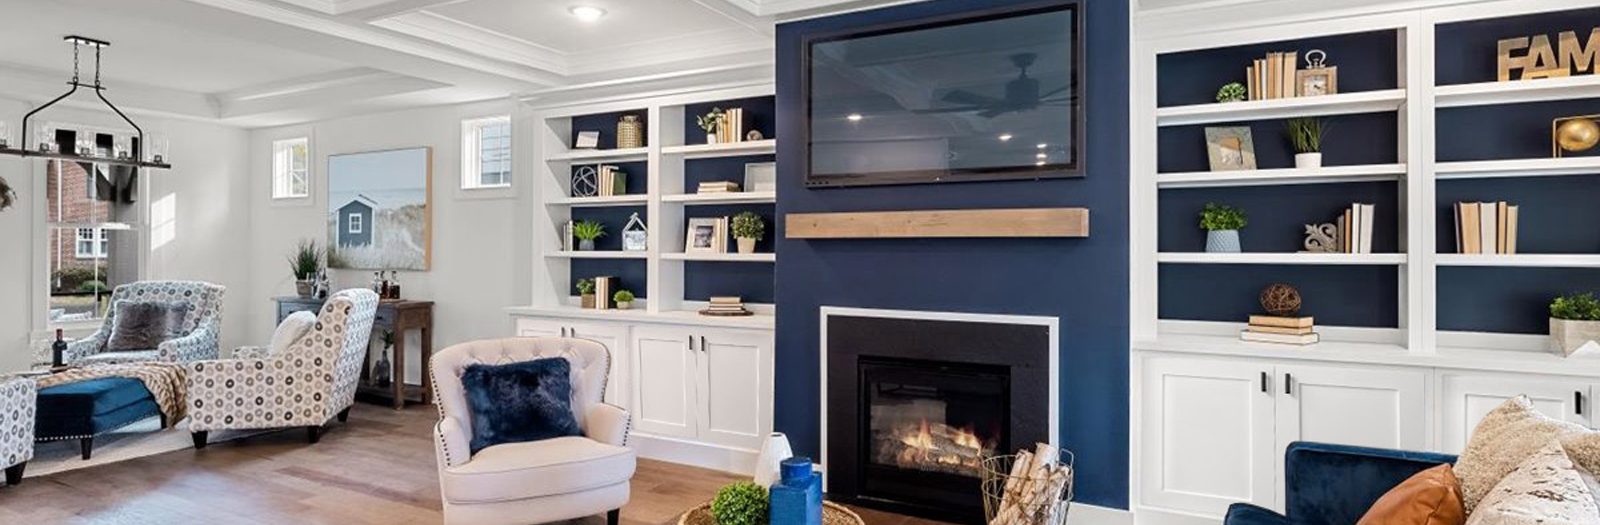 Beautiful family room with fireplace in remodeled home by Richmond Hill Design-Build